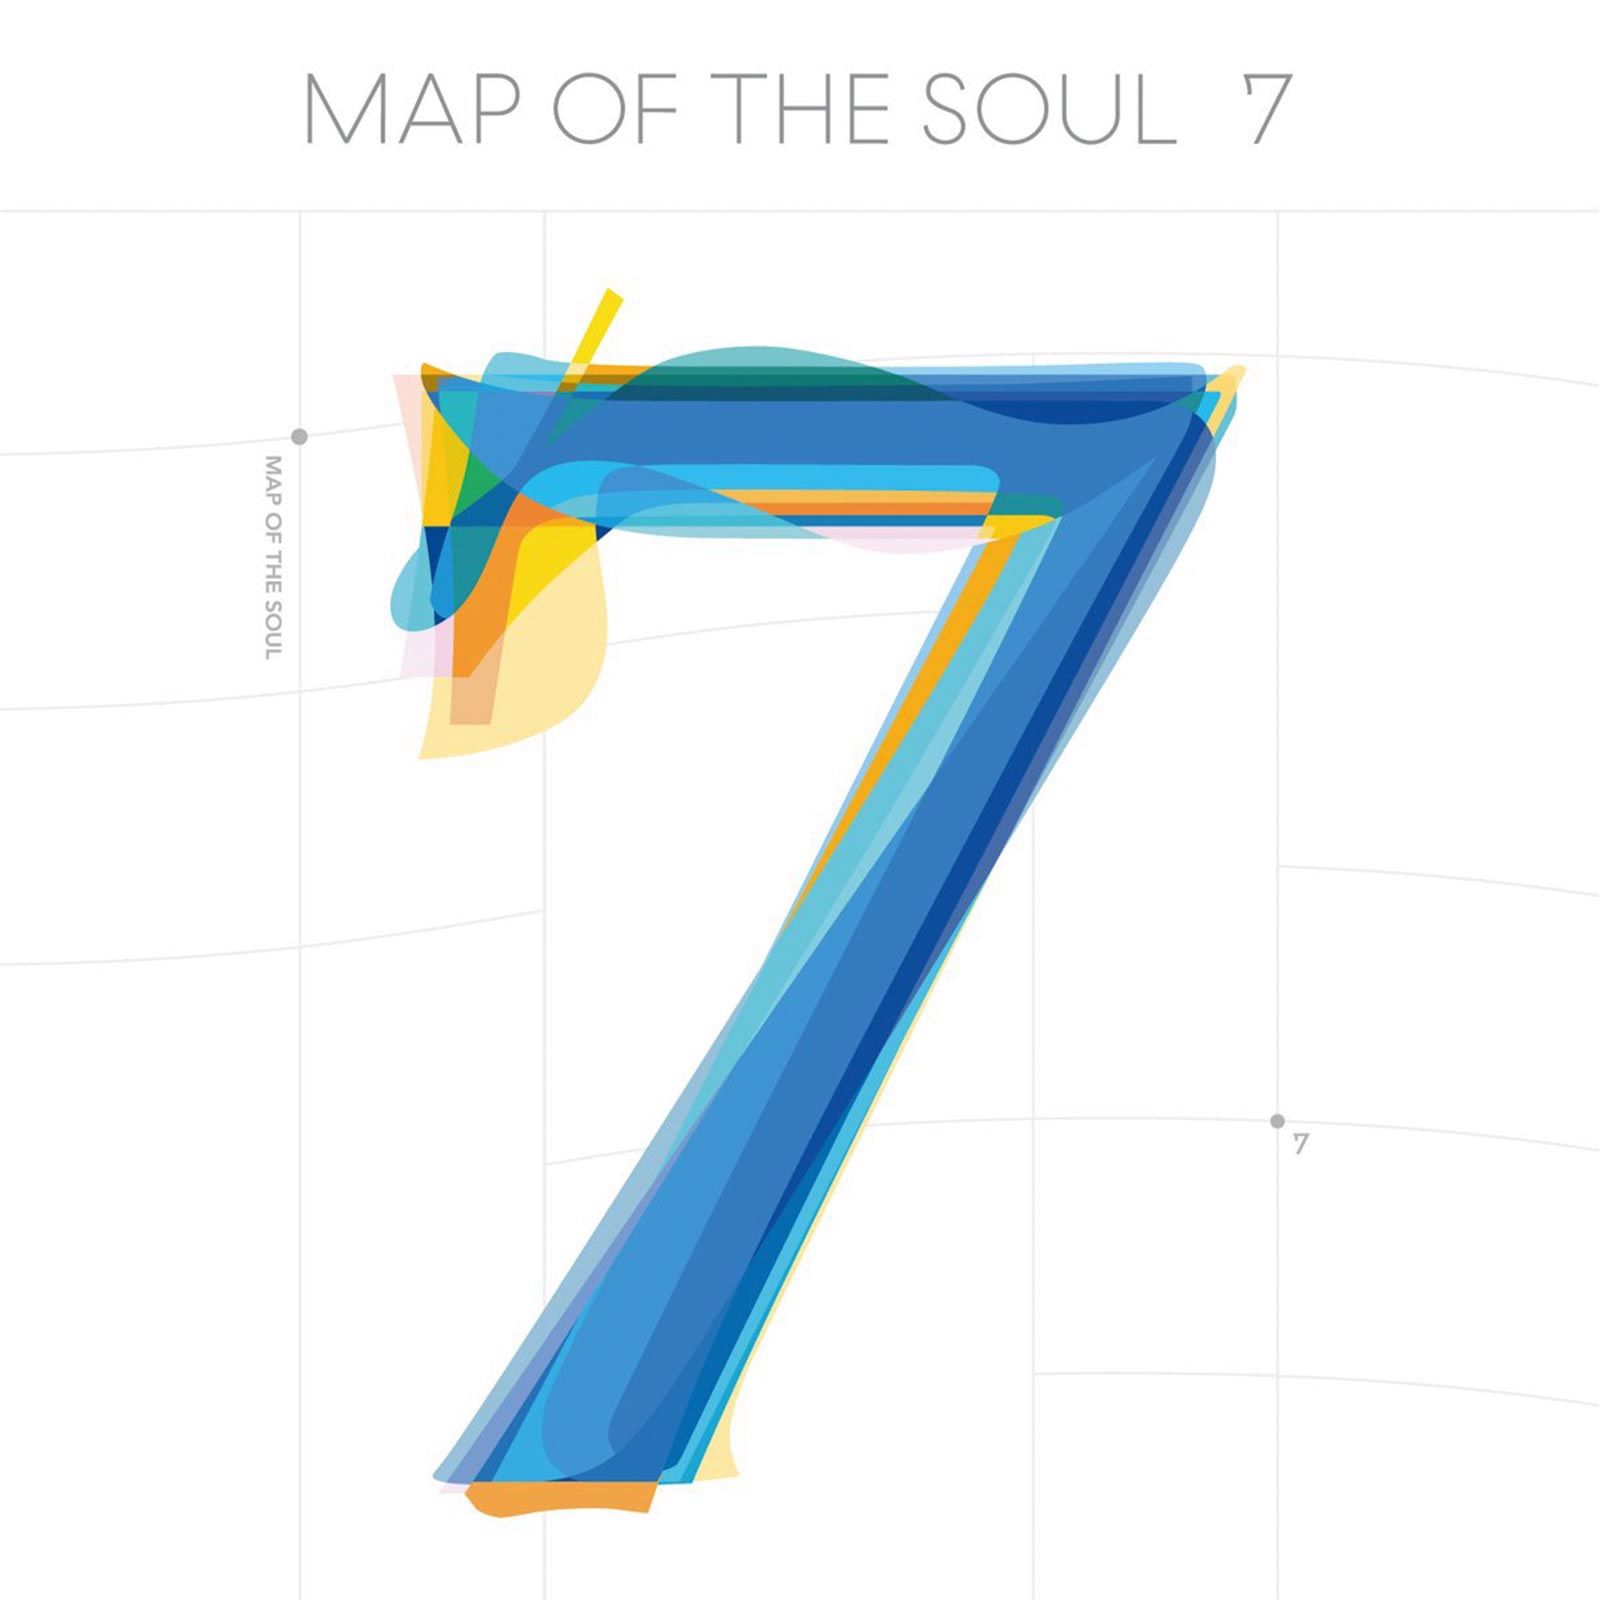 BTS - Map of the Soul 7